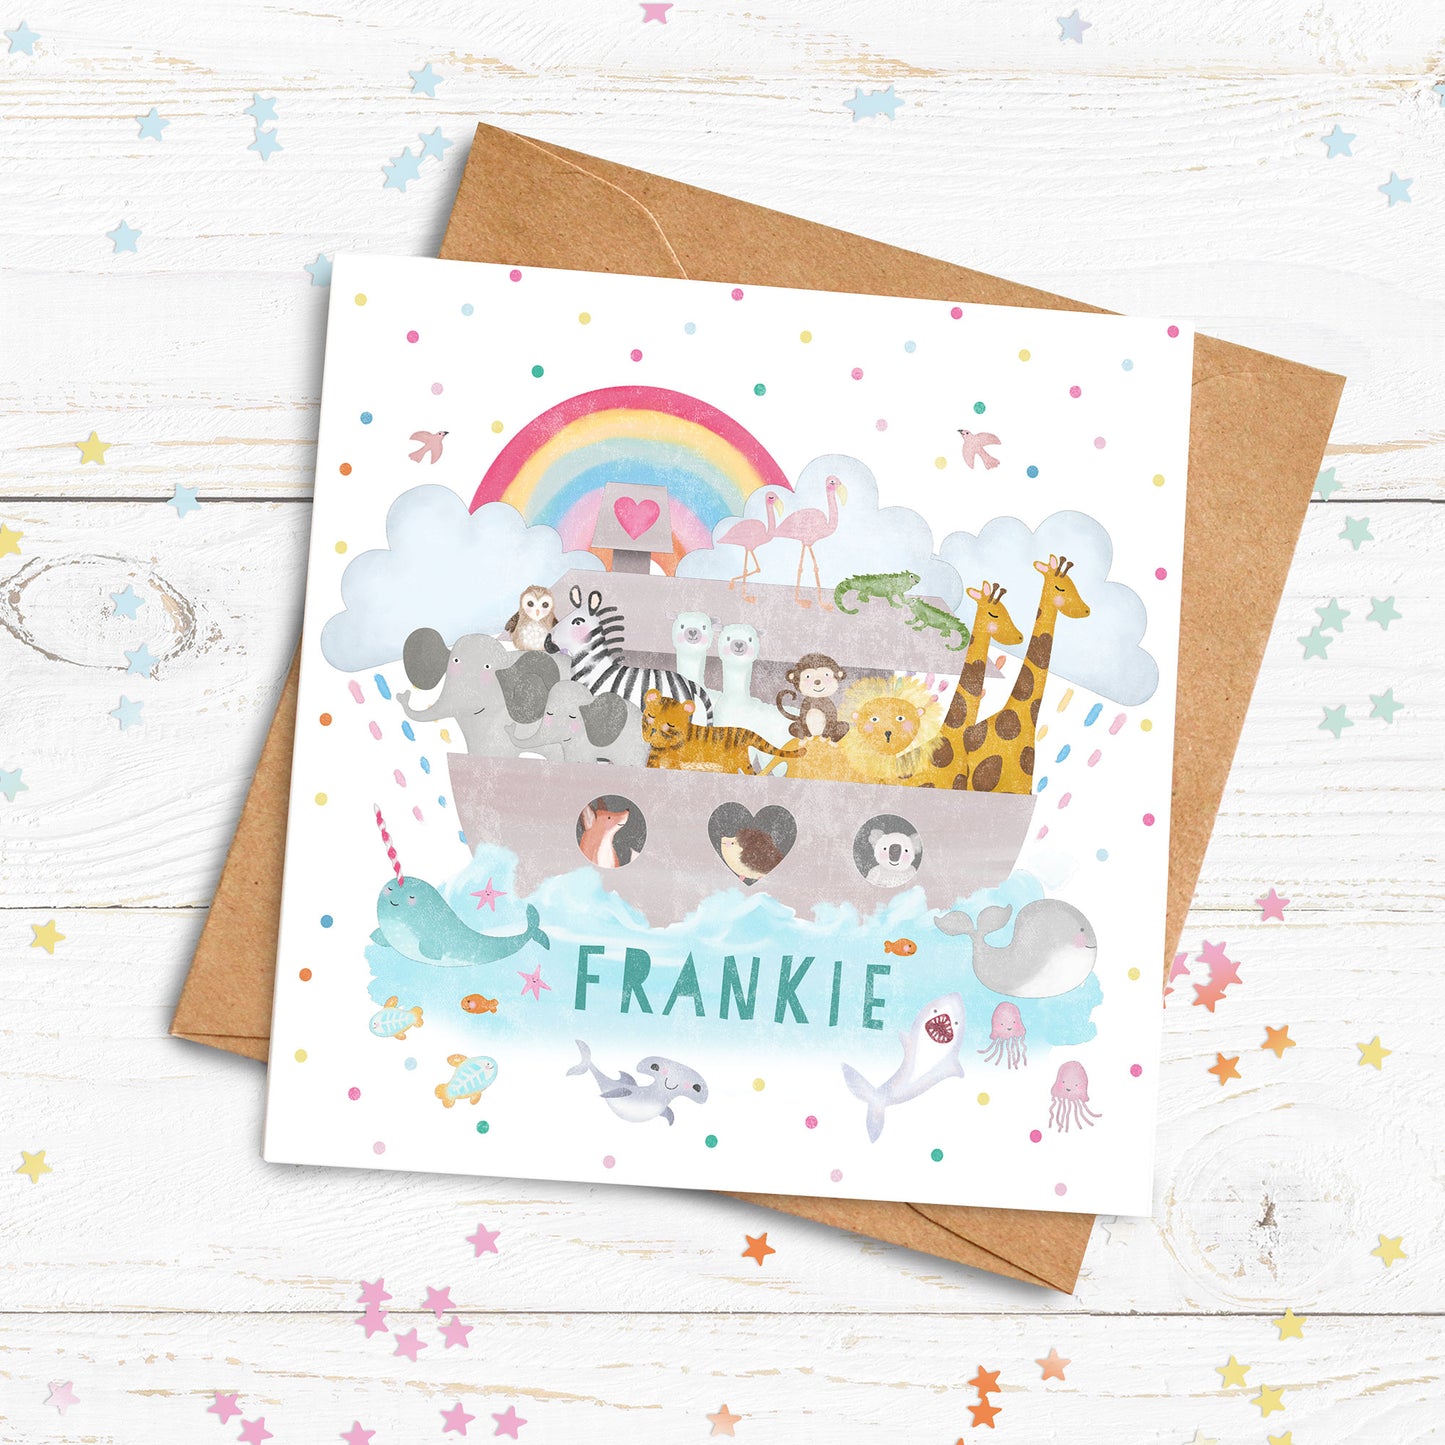 Personalised Noah's Ark card. New Baby Card. 1st Birthday, Christening, Communion Card. Send Direct Option.